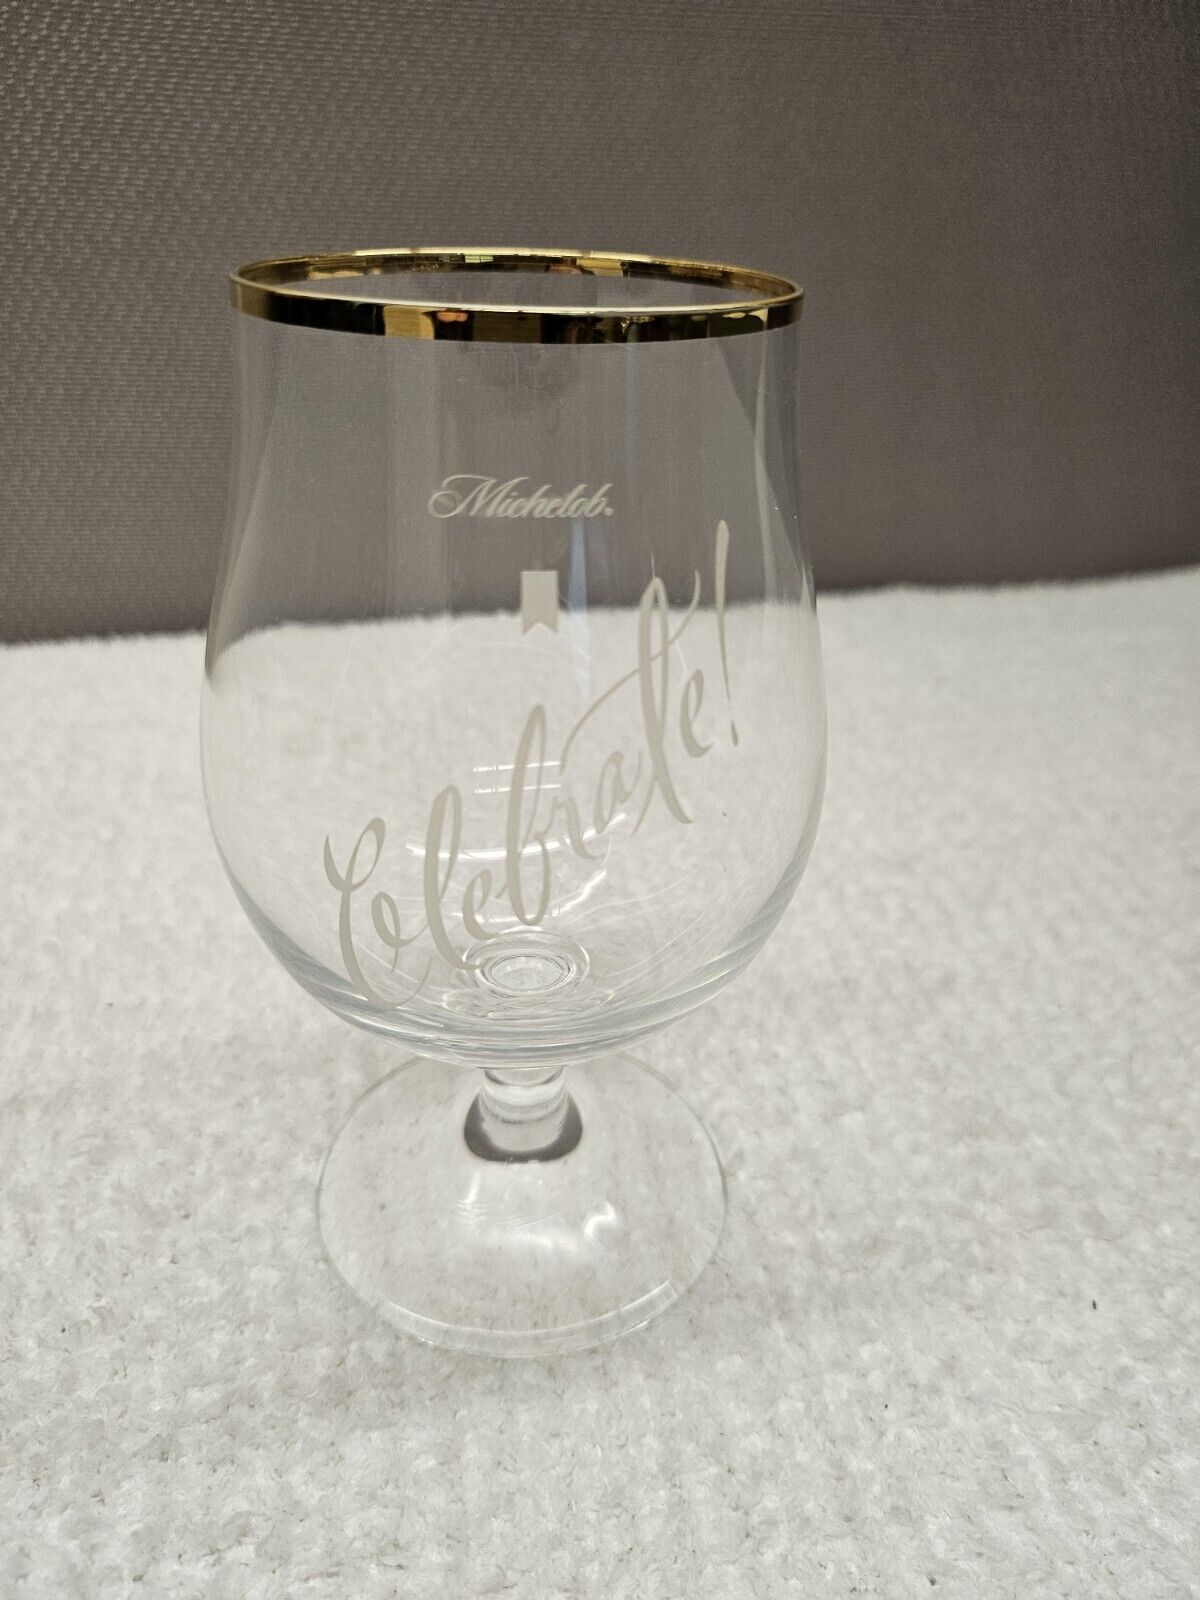 Michelob Celebrate Beer Glass Gold Rimmed Tulip Chalice